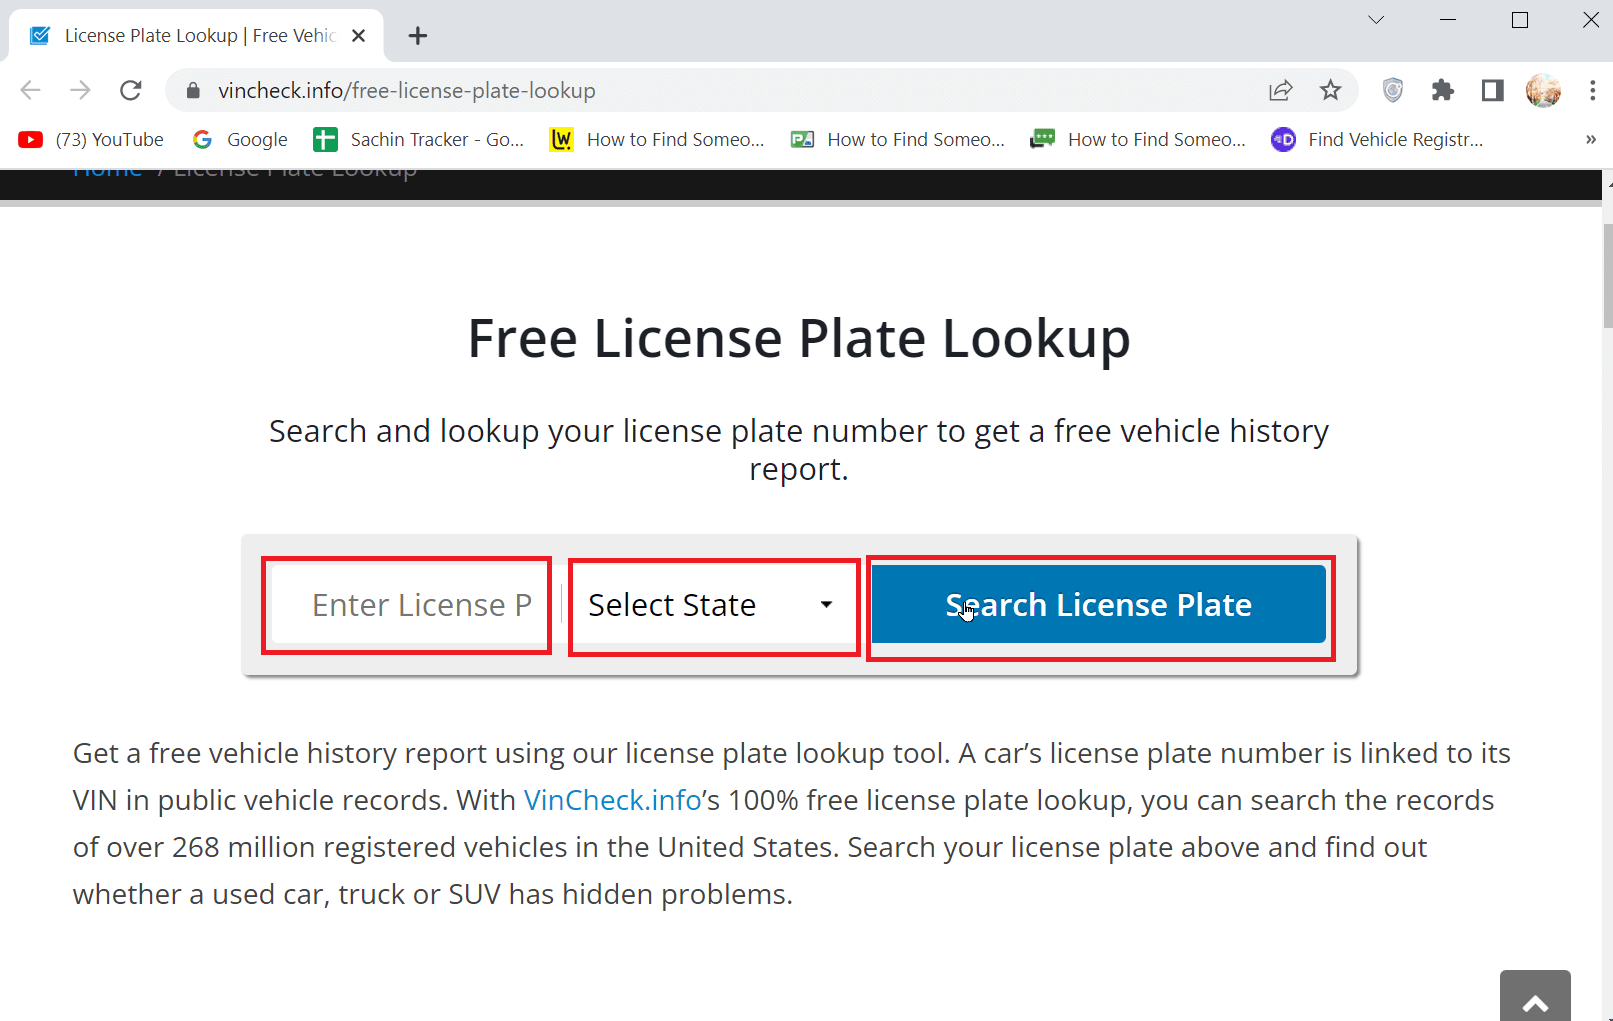 enter license plate number, state and click on search